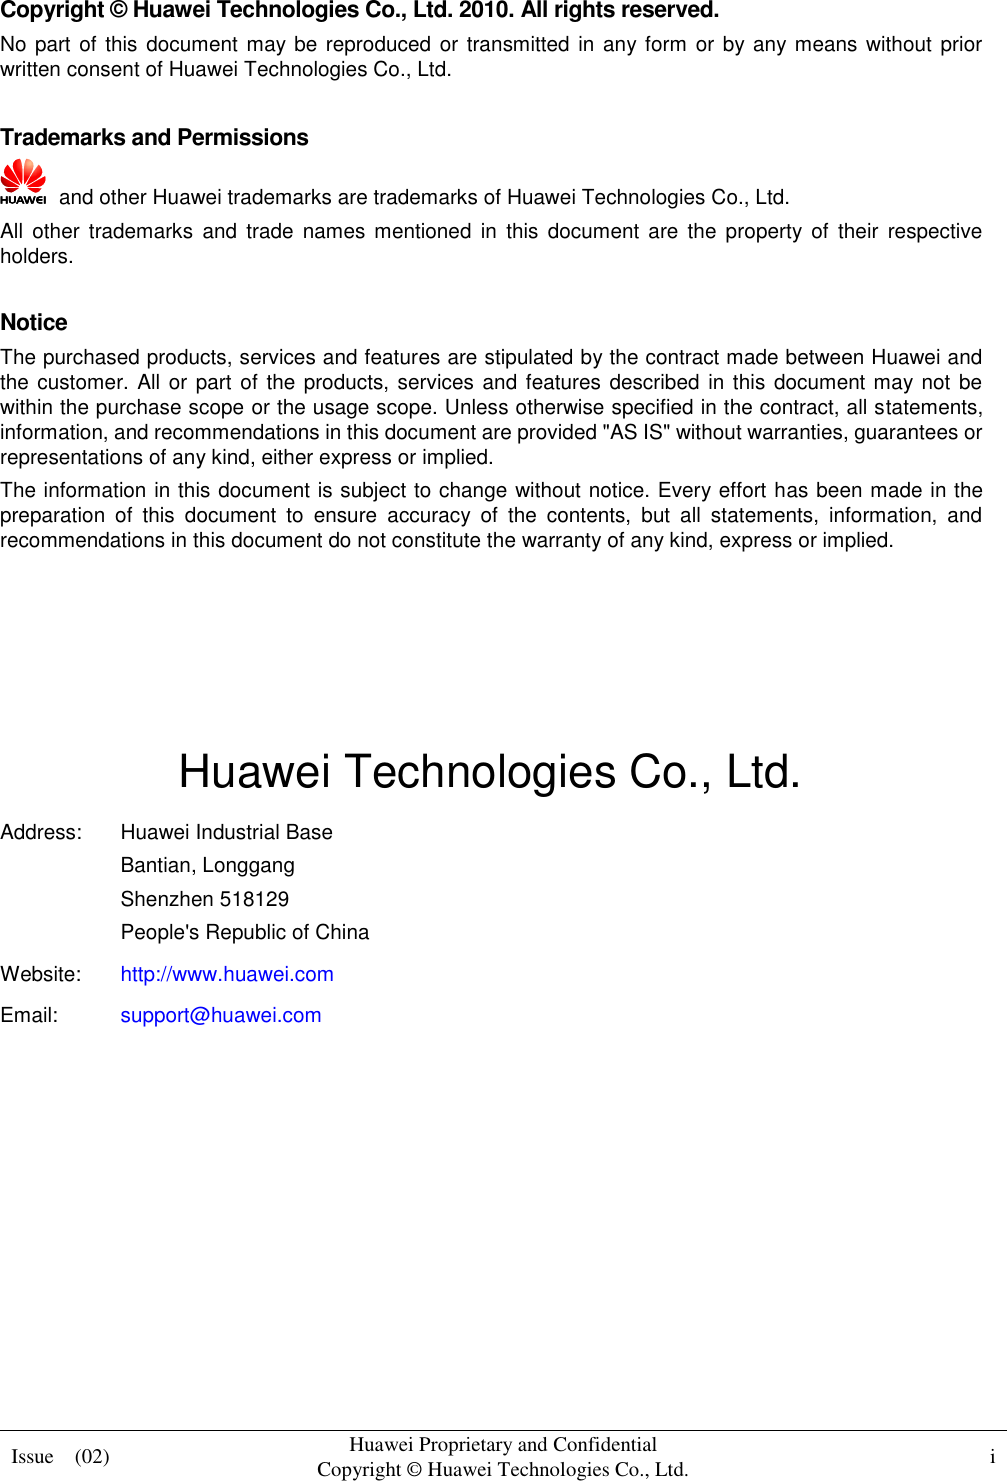  Issue    (02) Huawei Proprietary and Confidential                                     Copyright © Huawei Technologies Co., Ltd. i    Copyright © Huawei Technologies Co., Ltd. 2010. All rights reserved. No part of this  document  may be reproduced or transmitted in any form or by any means without prior written consent of Huawei Technologies Co., Ltd.  Trademarks and Permissions   and other Huawei trademarks are trademarks of Huawei Technologies Co., Ltd. All  other  trademarks  and  trade  names mentioned  in  this  document  are  the  property  of  their  respective holders.  Notice The purchased products, services and features are stipulated by the contract made between Huawei and the customer.  All or part of the products, services and features described  in this document may not be within the purchase scope or the usage scope. Unless otherwise specified in the contract, all statements, information, and recommendations in this document are provided &quot;AS IS&quot; without warranties, guarantees or representations of any kind, either express or implied. The information in this document is subject to change without notice. Every effort has been made in the preparation  of  this  document  to  ensure  accuracy  of  the  contents,  but  all  statements,  information,  and recommendations in this document do not constitute the warranty of any kind, express or implied.     Huawei Technologies Co., Ltd. Address: Huawei Industrial Base Bantian, Longgang Shenzhen 518129 People&apos;s Republic of China Website: http://www.huawei.com Email: support@huawei.com          